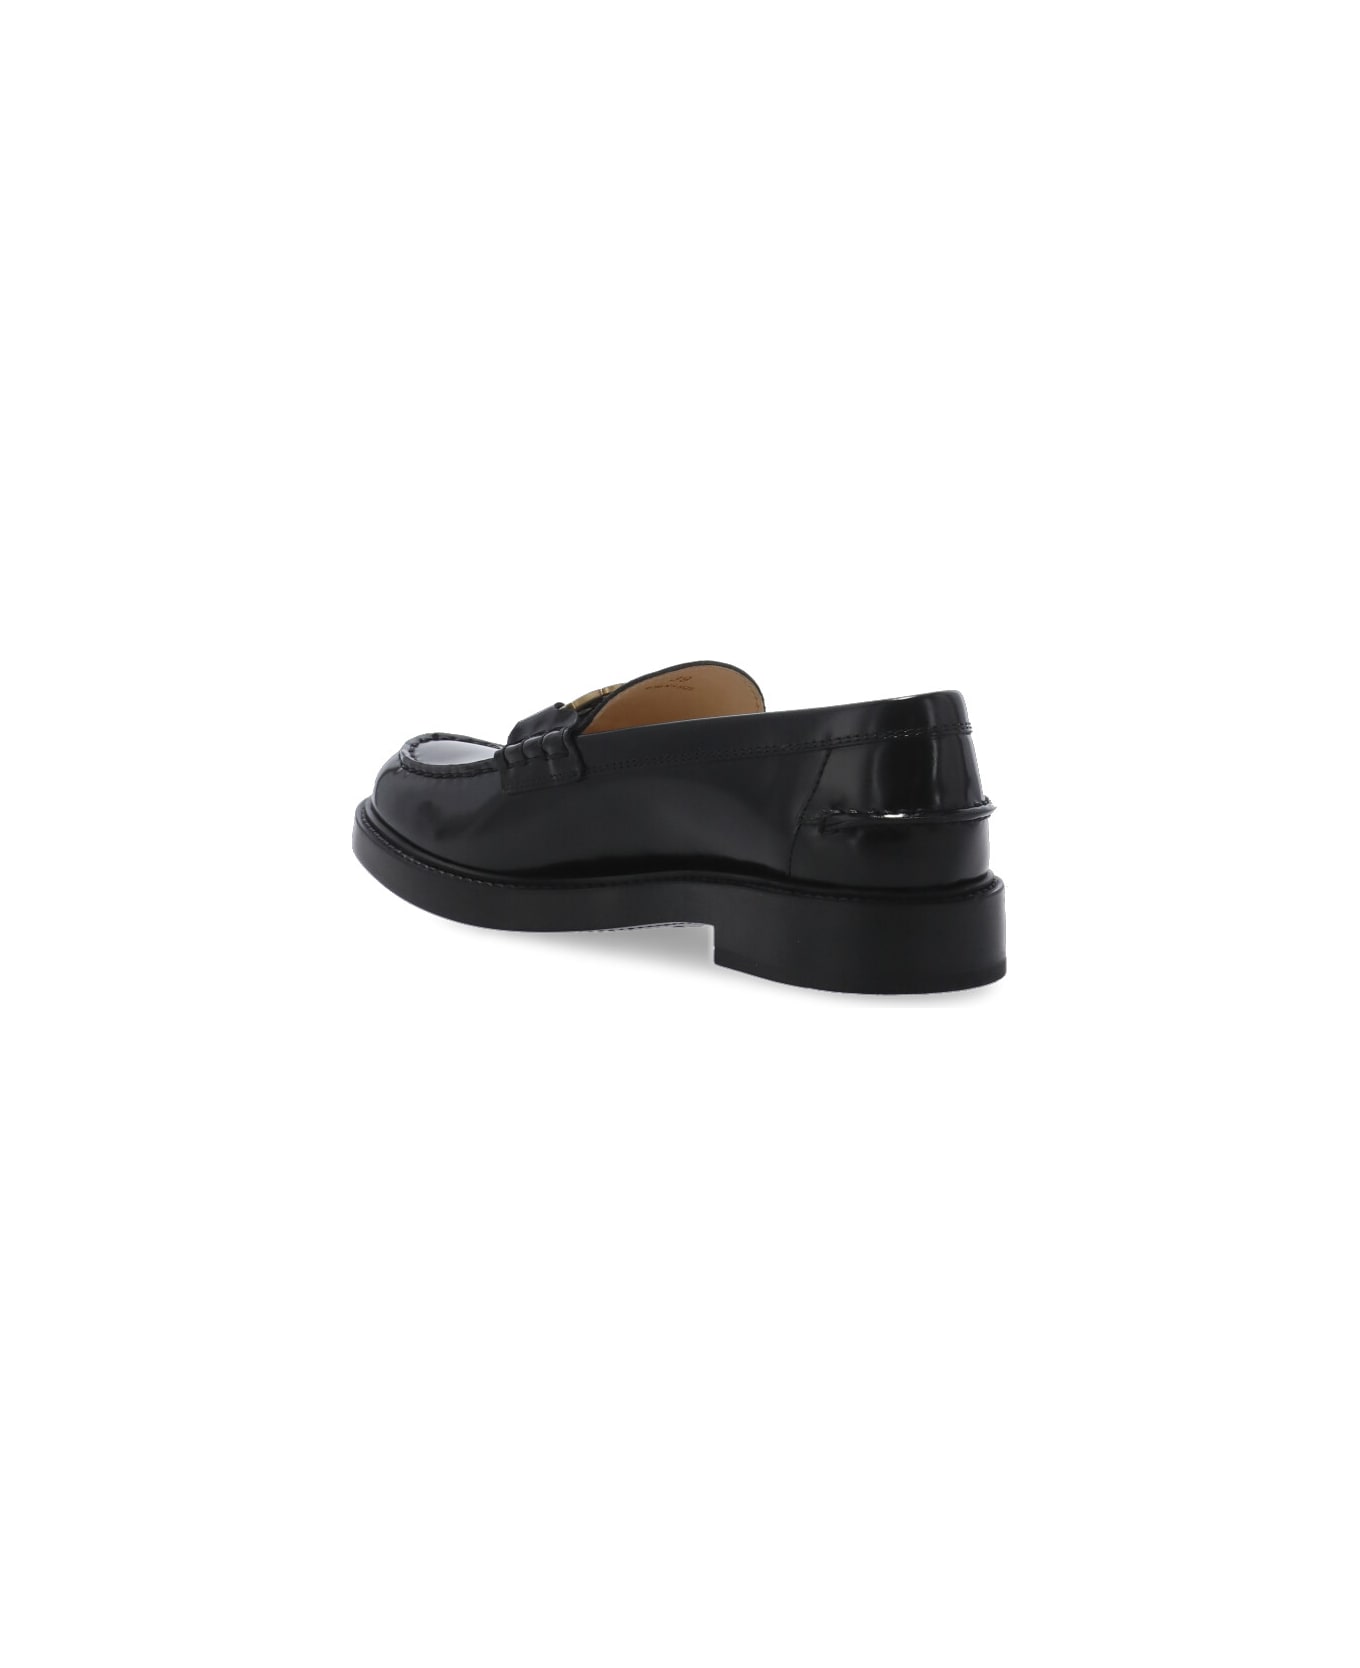 Tod's Leather Loafers - Black